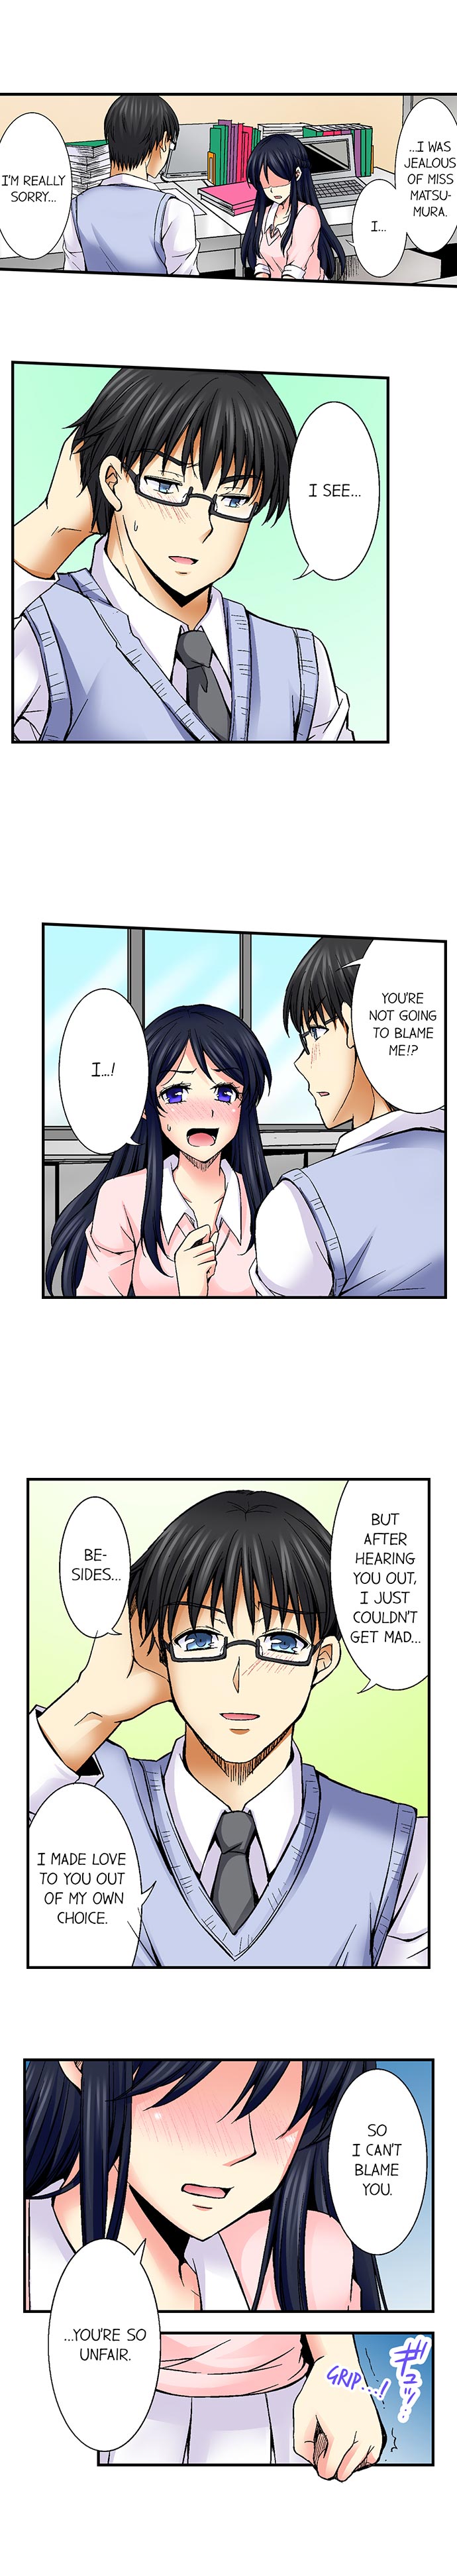 Why Can't i Have Sex With My Teacher? - Chapter 17 Page 3